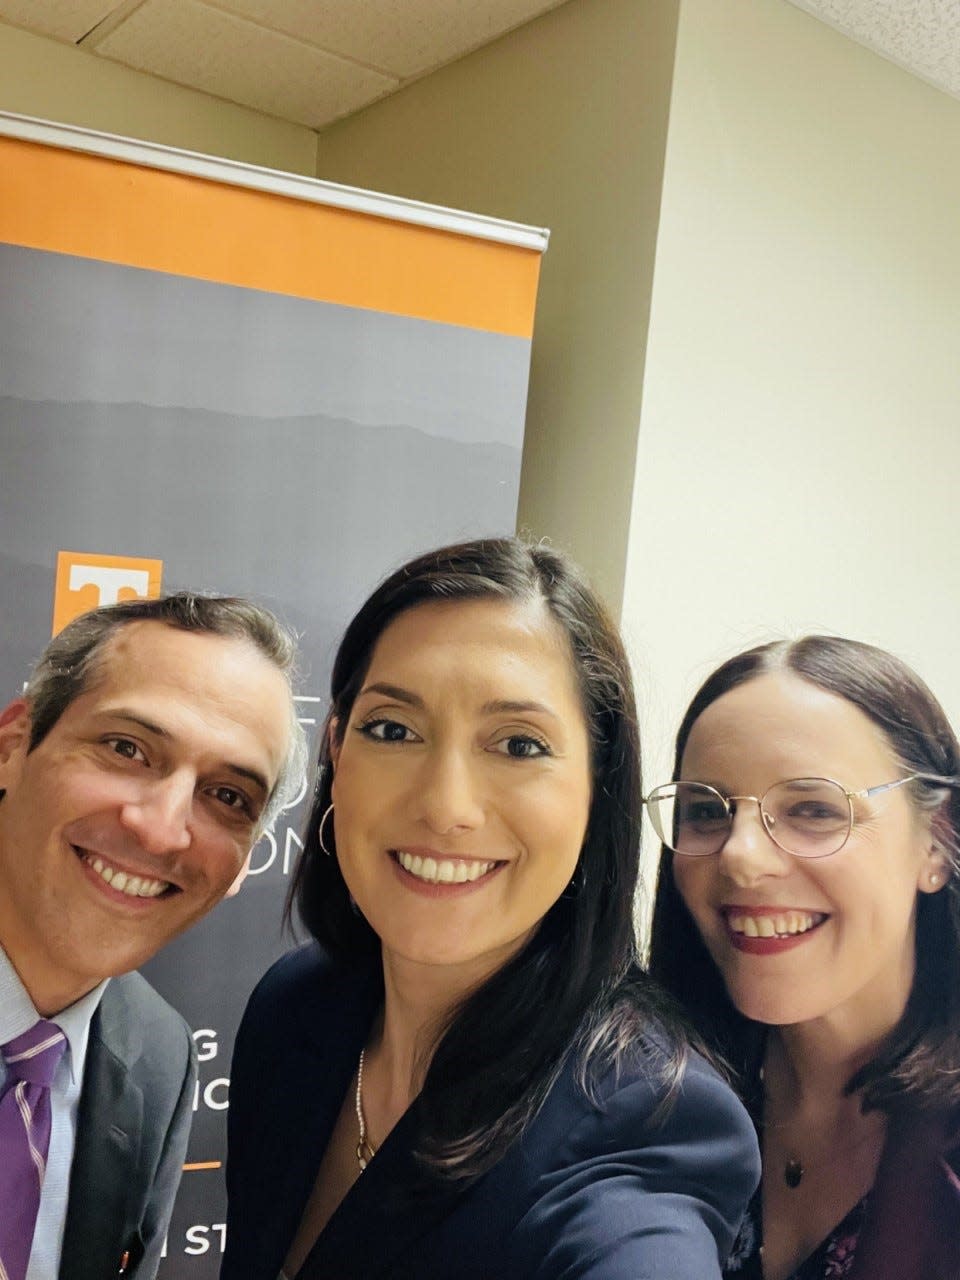 PBS "NewsHour" correspondent Nick Schifrin poses for a selfie with Teodora Trifonova, center, and Dr. Joy Jenkins of the University of Tennessee at Knoxville during his speech at the school on April 28 as part of an international reporting symposium.